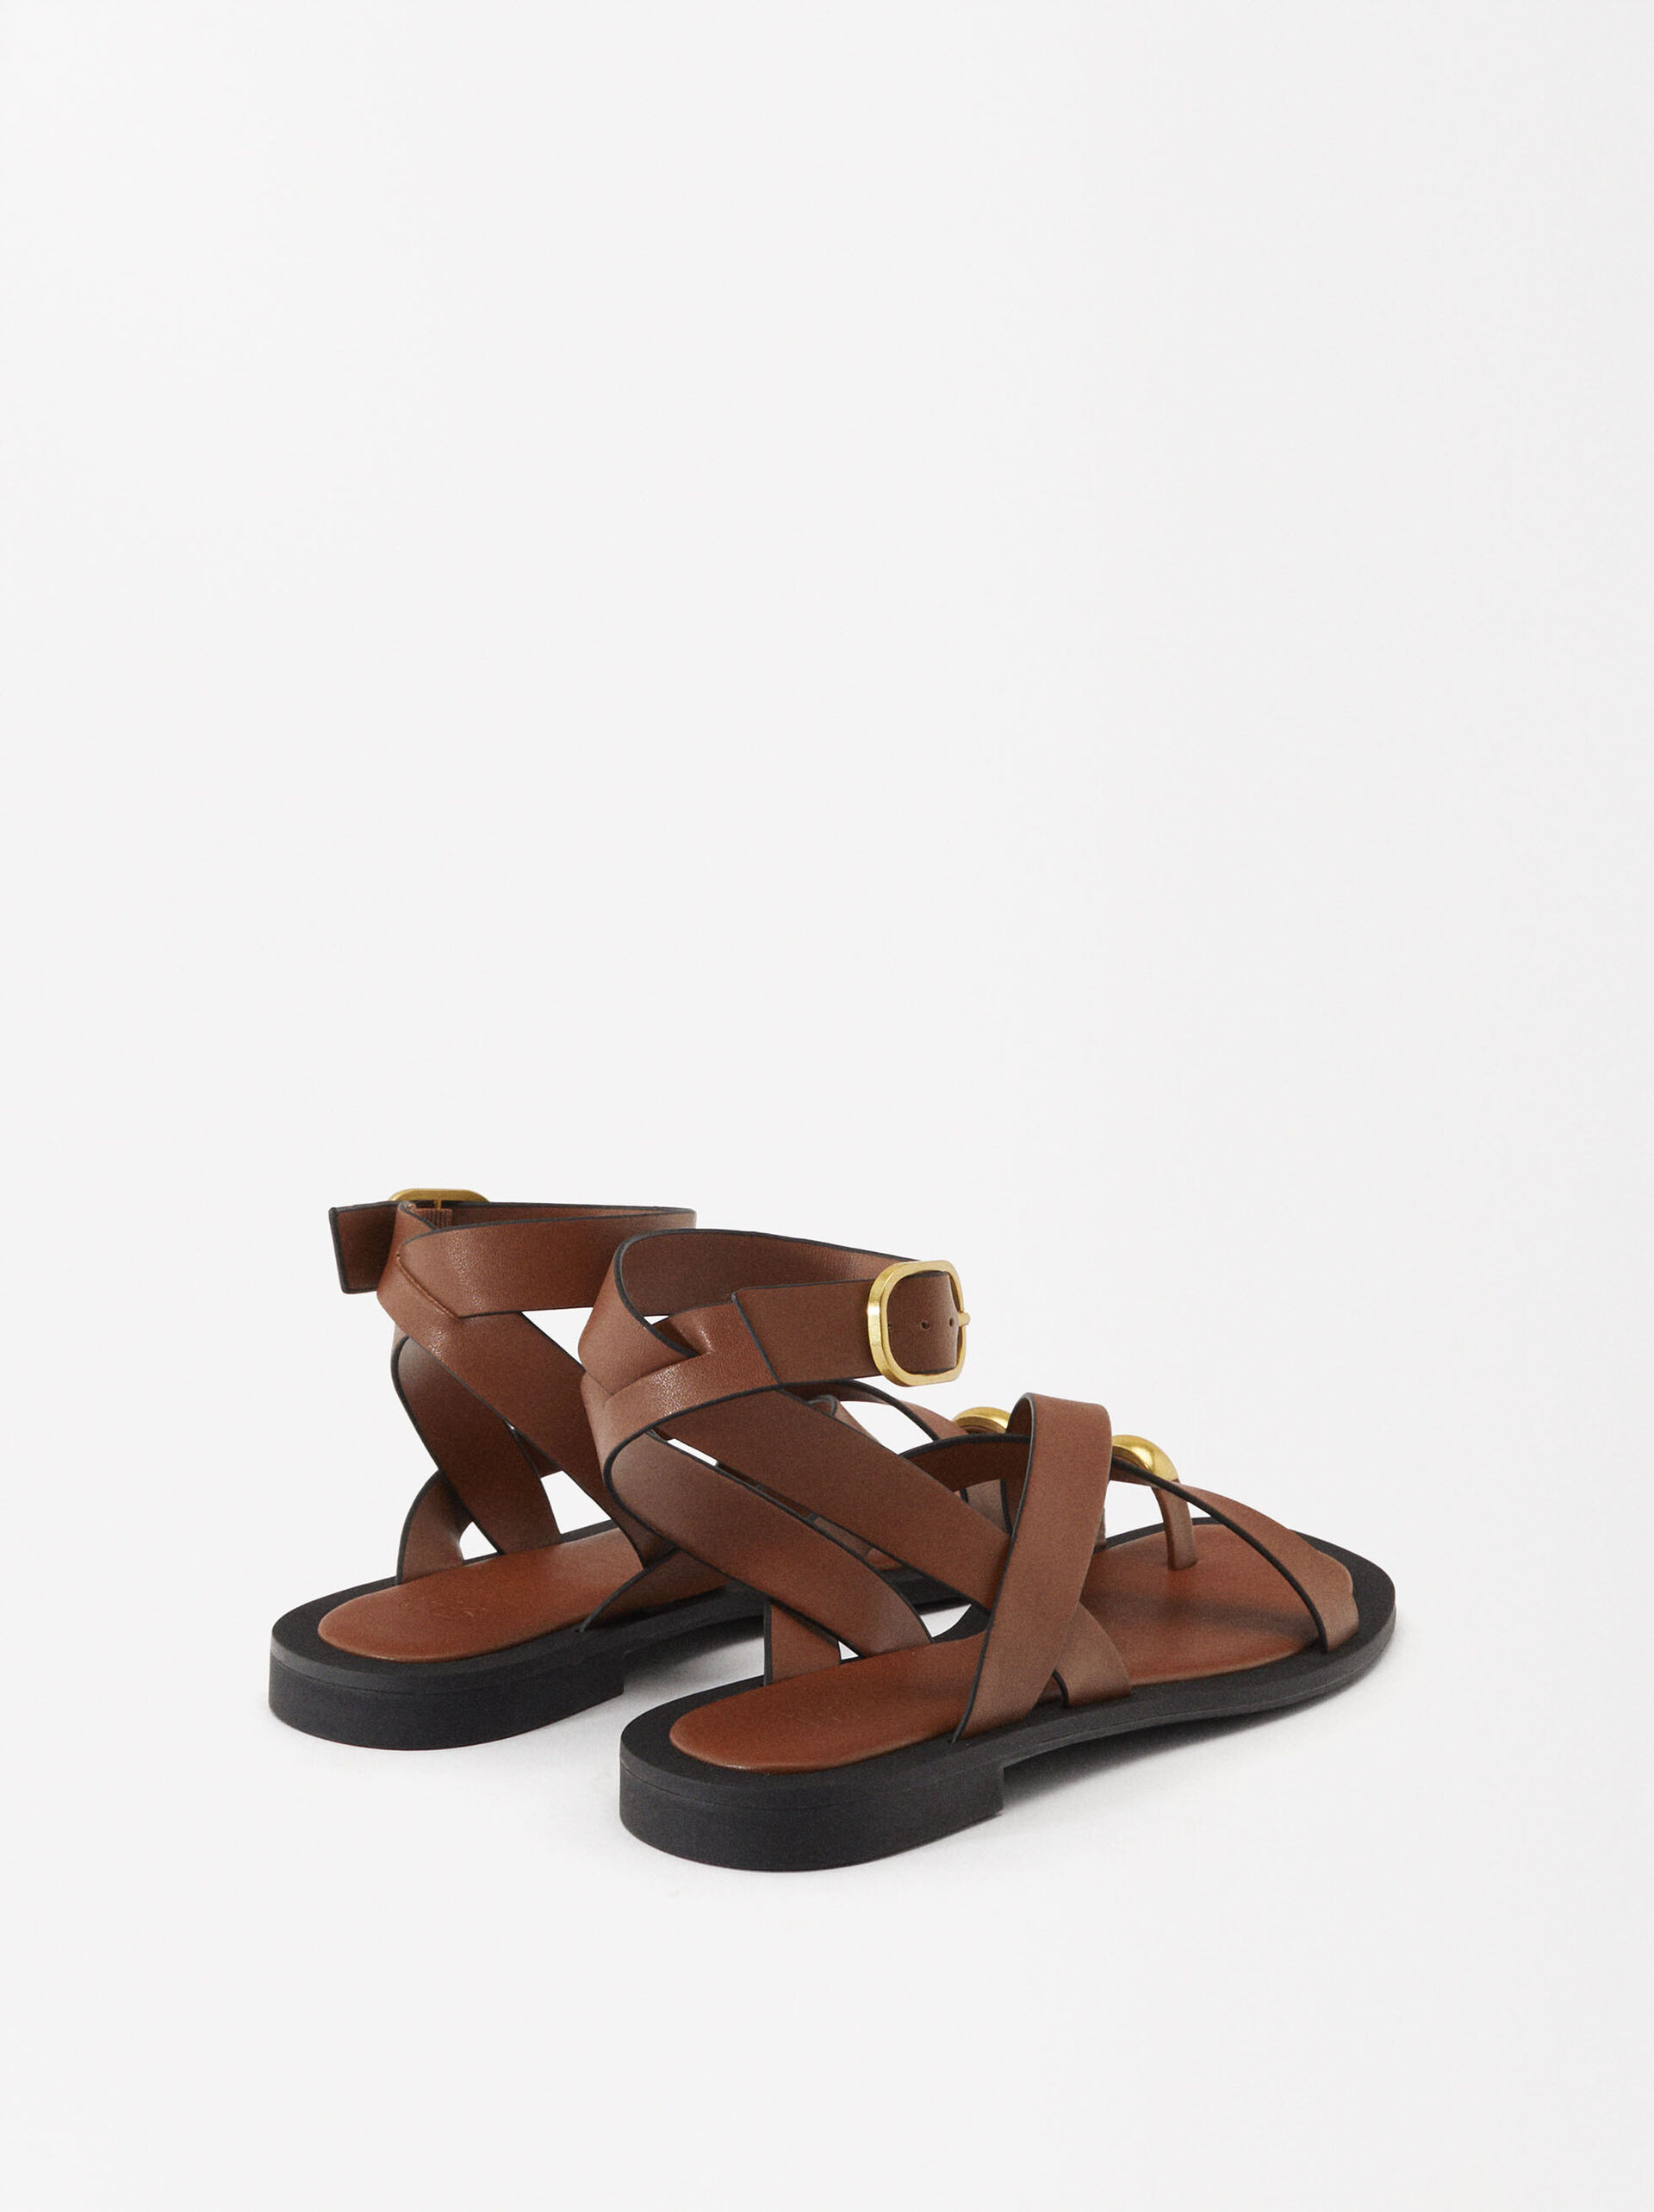 Criss-Cross Flat Sandals With Metallic Detail image number 3.0